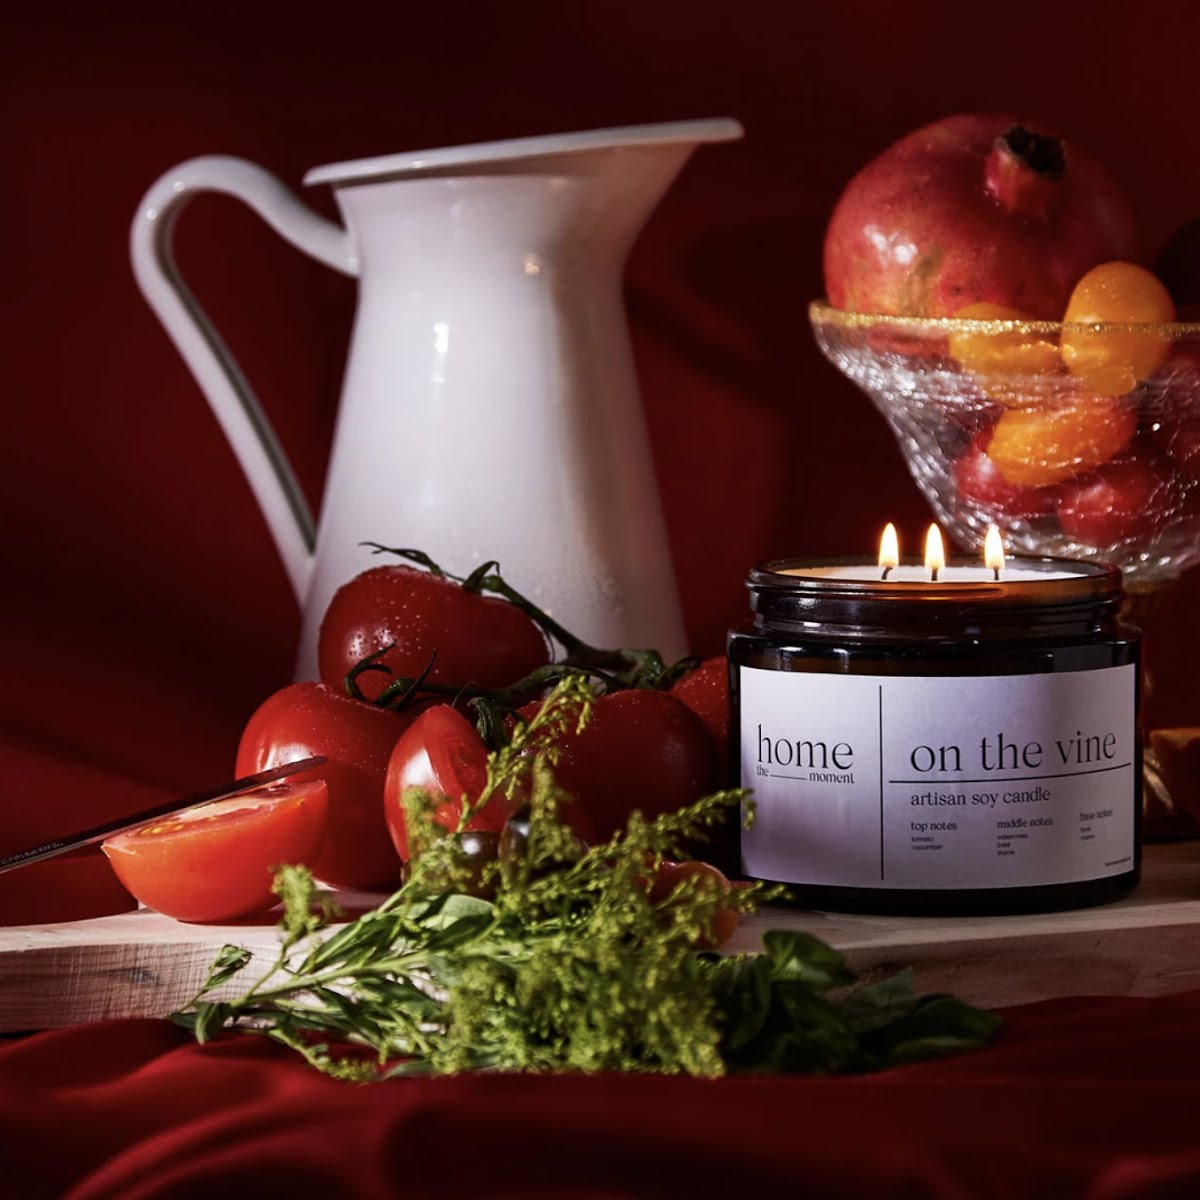 On The Vine candle, €42, The Home Moment